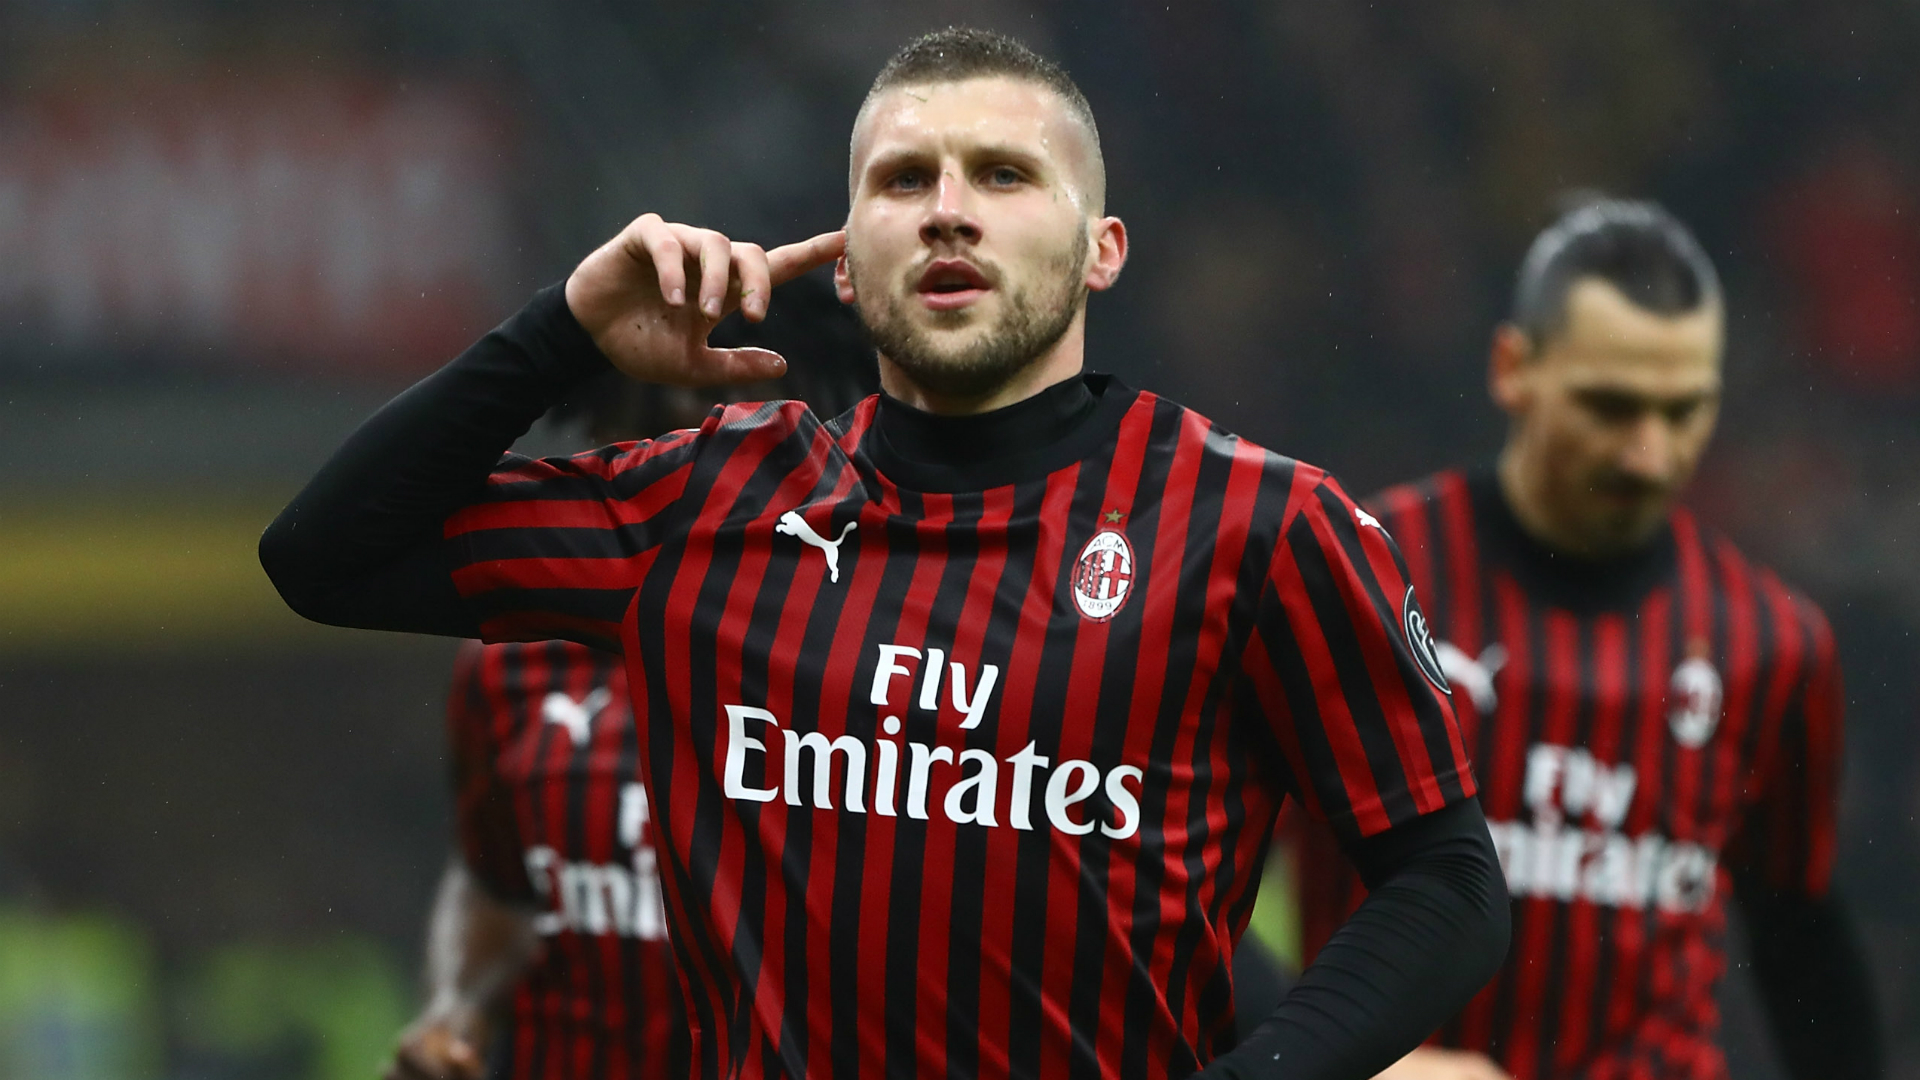 Rebic Strike Help Secure Milan's First Win In Four Against Torino